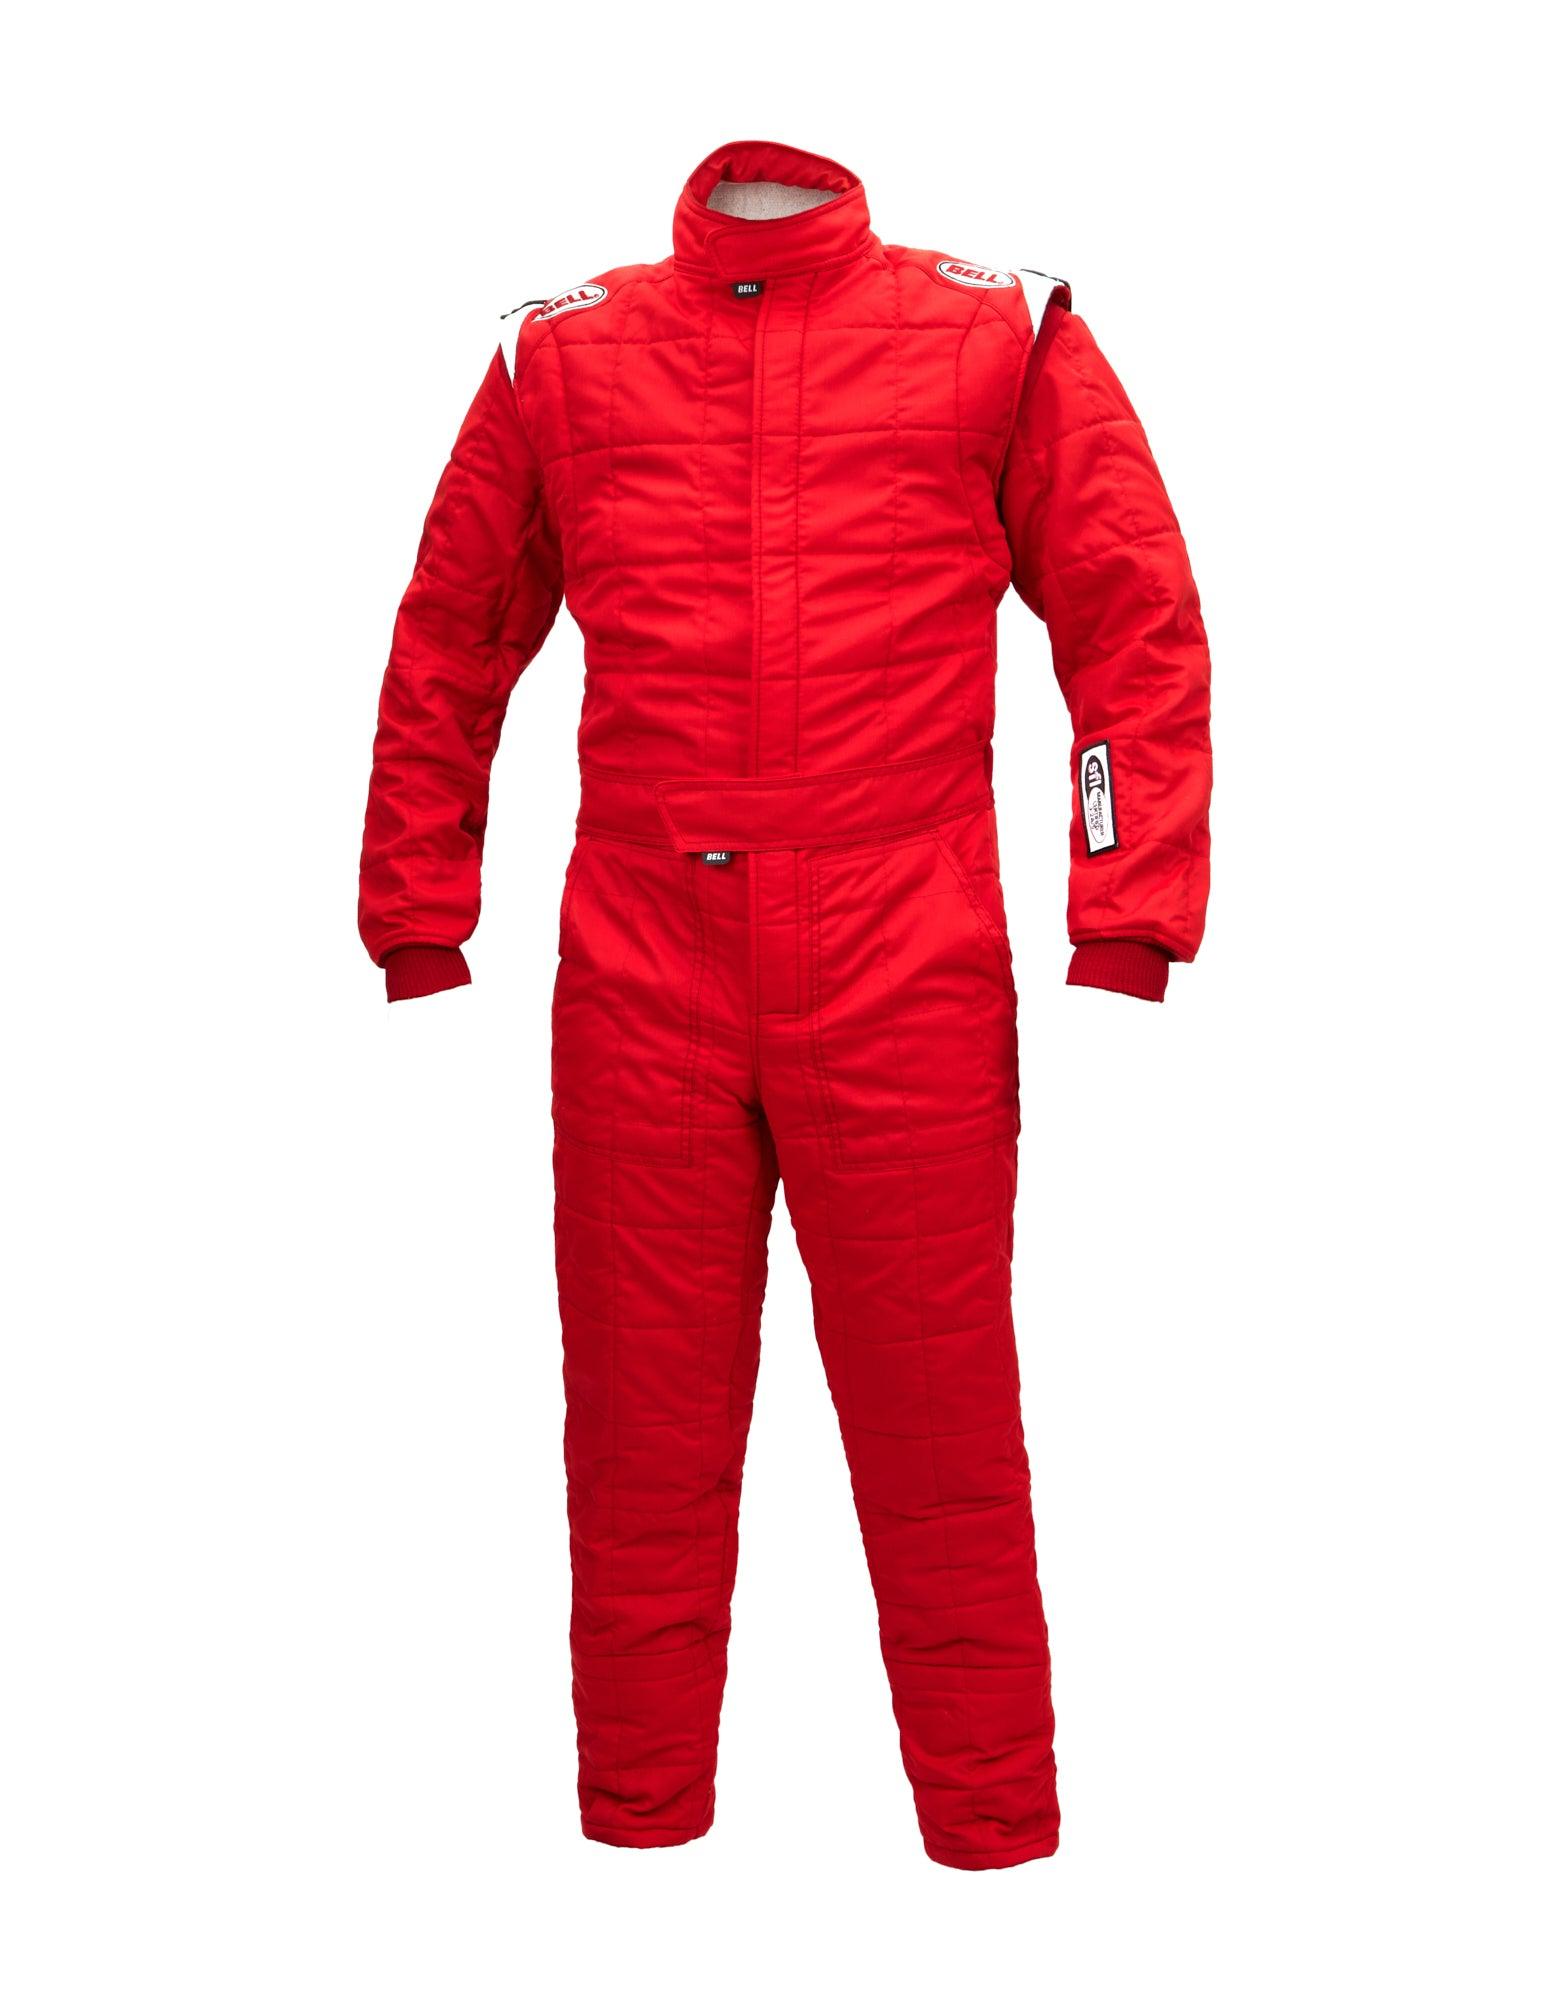 Suit SPORT-TX Red 2X-Large SFI 3.2A/5 - Burlile Performance Products